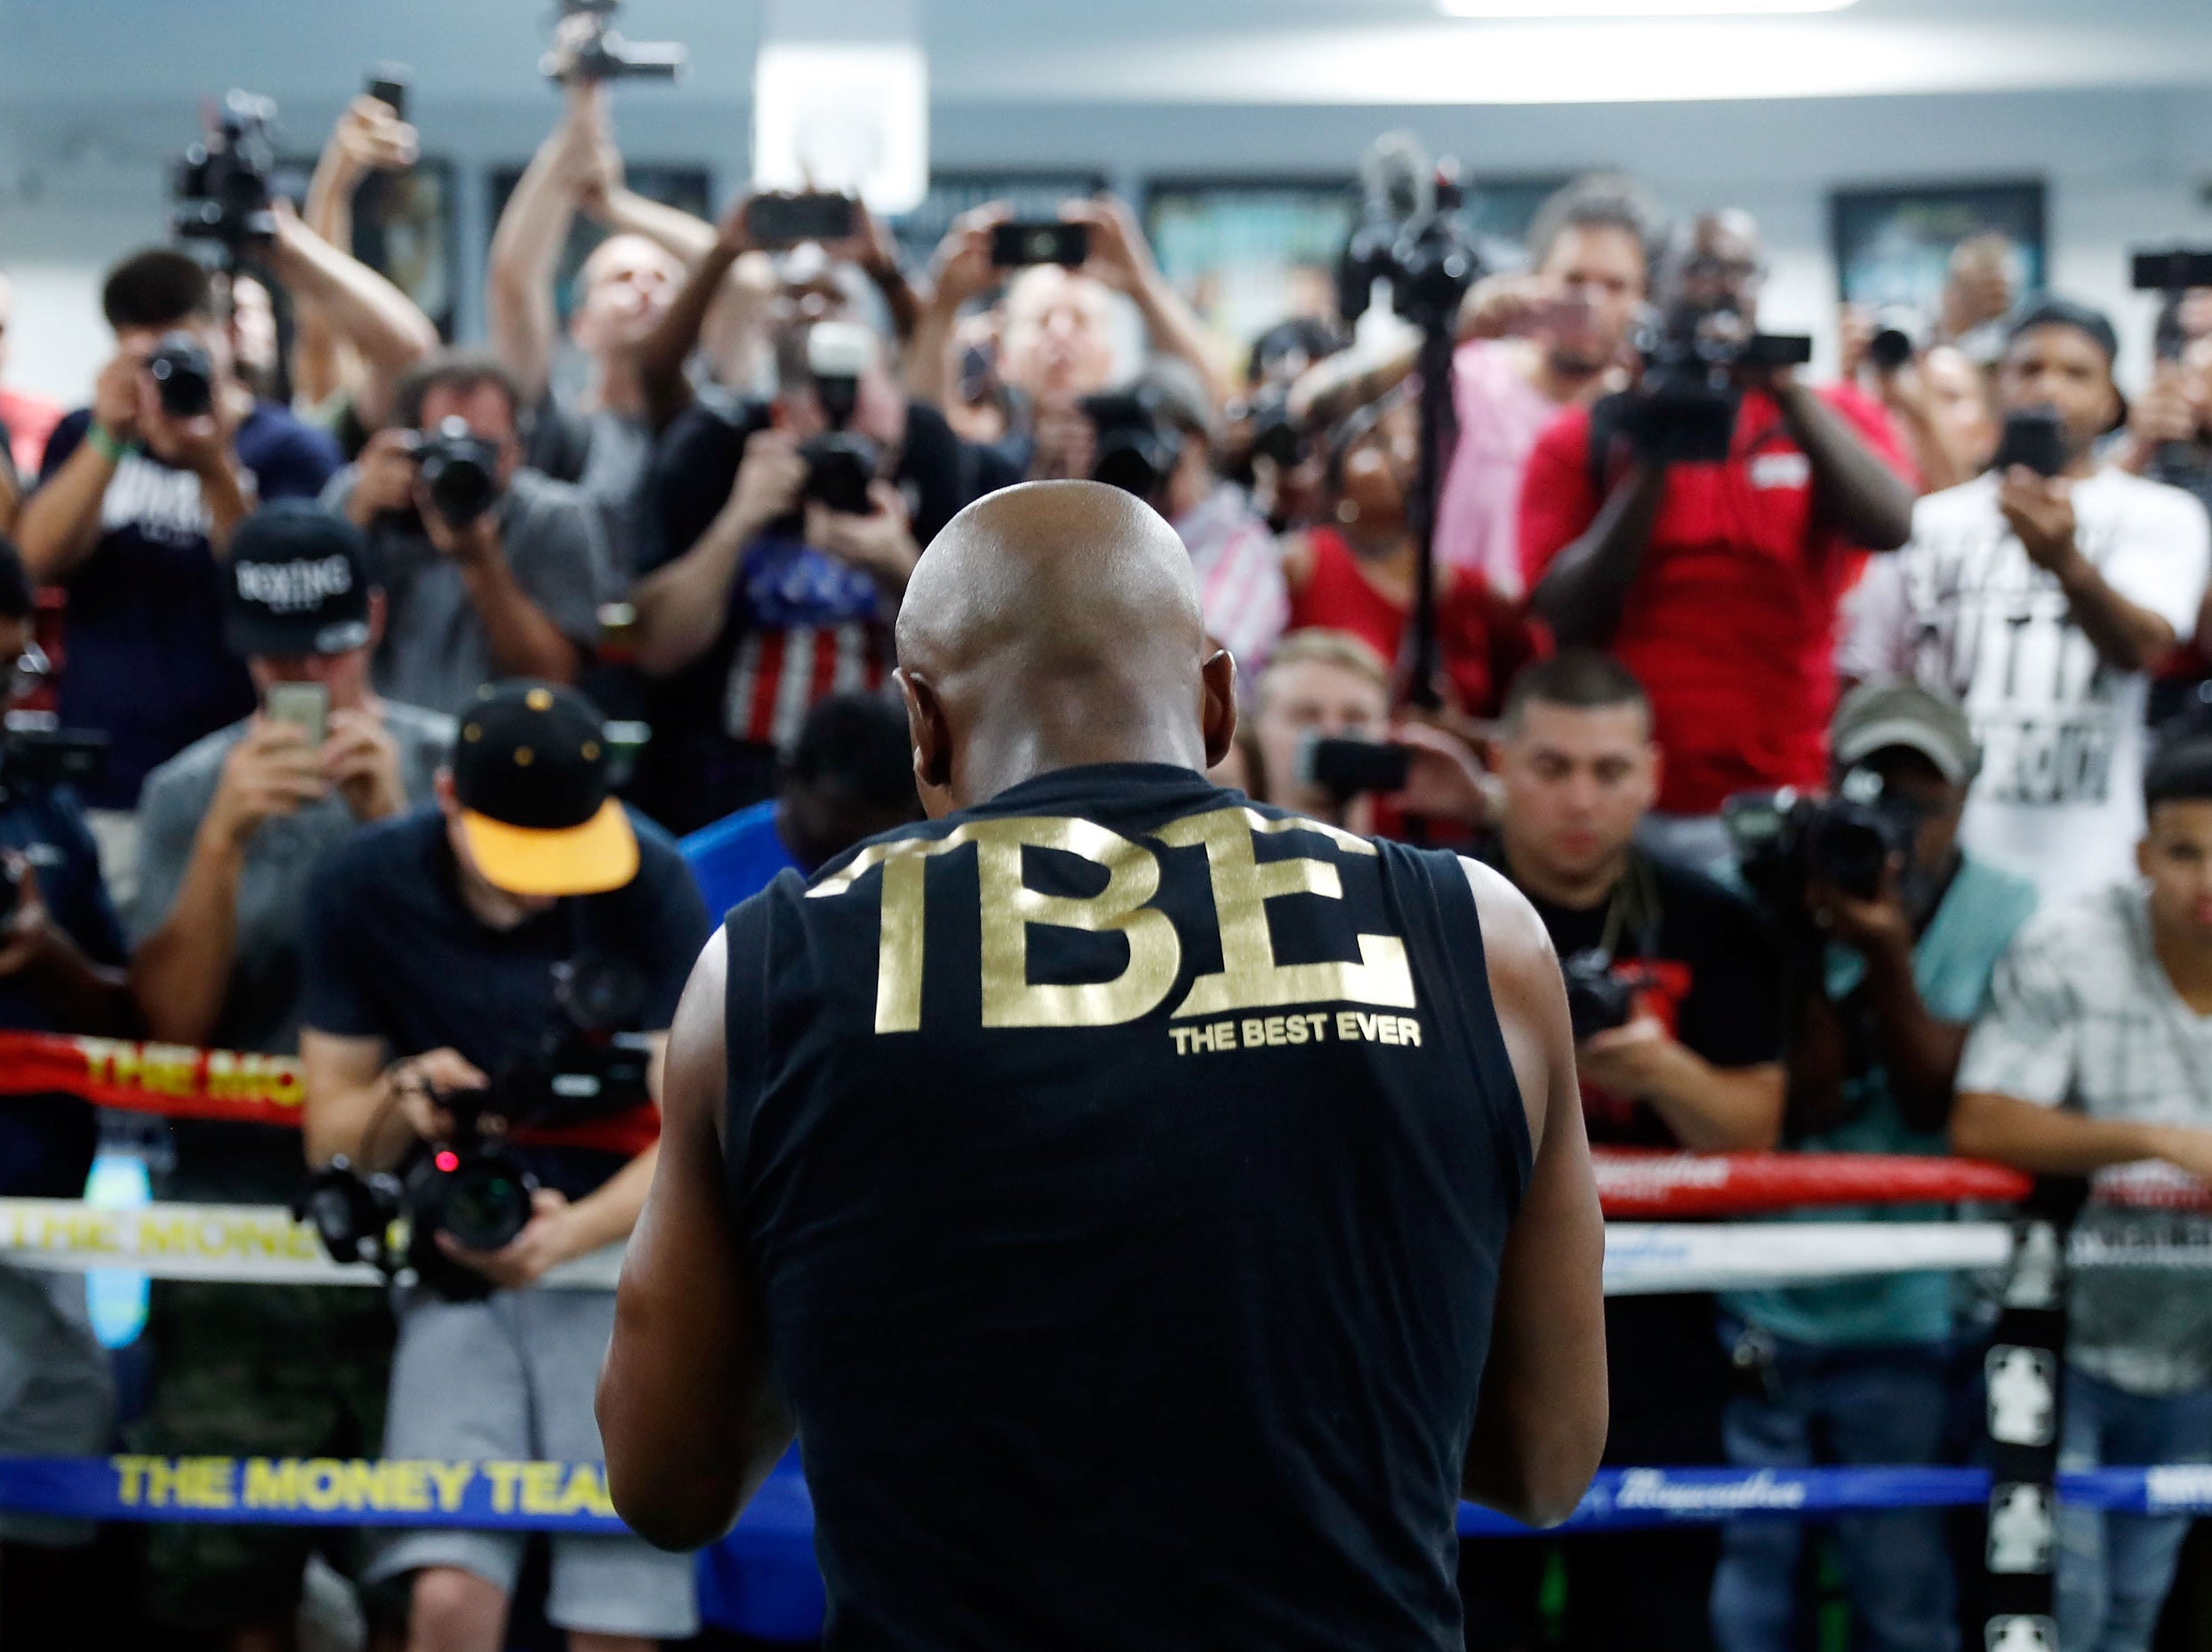 Mayweather shadowboxing during his open workout